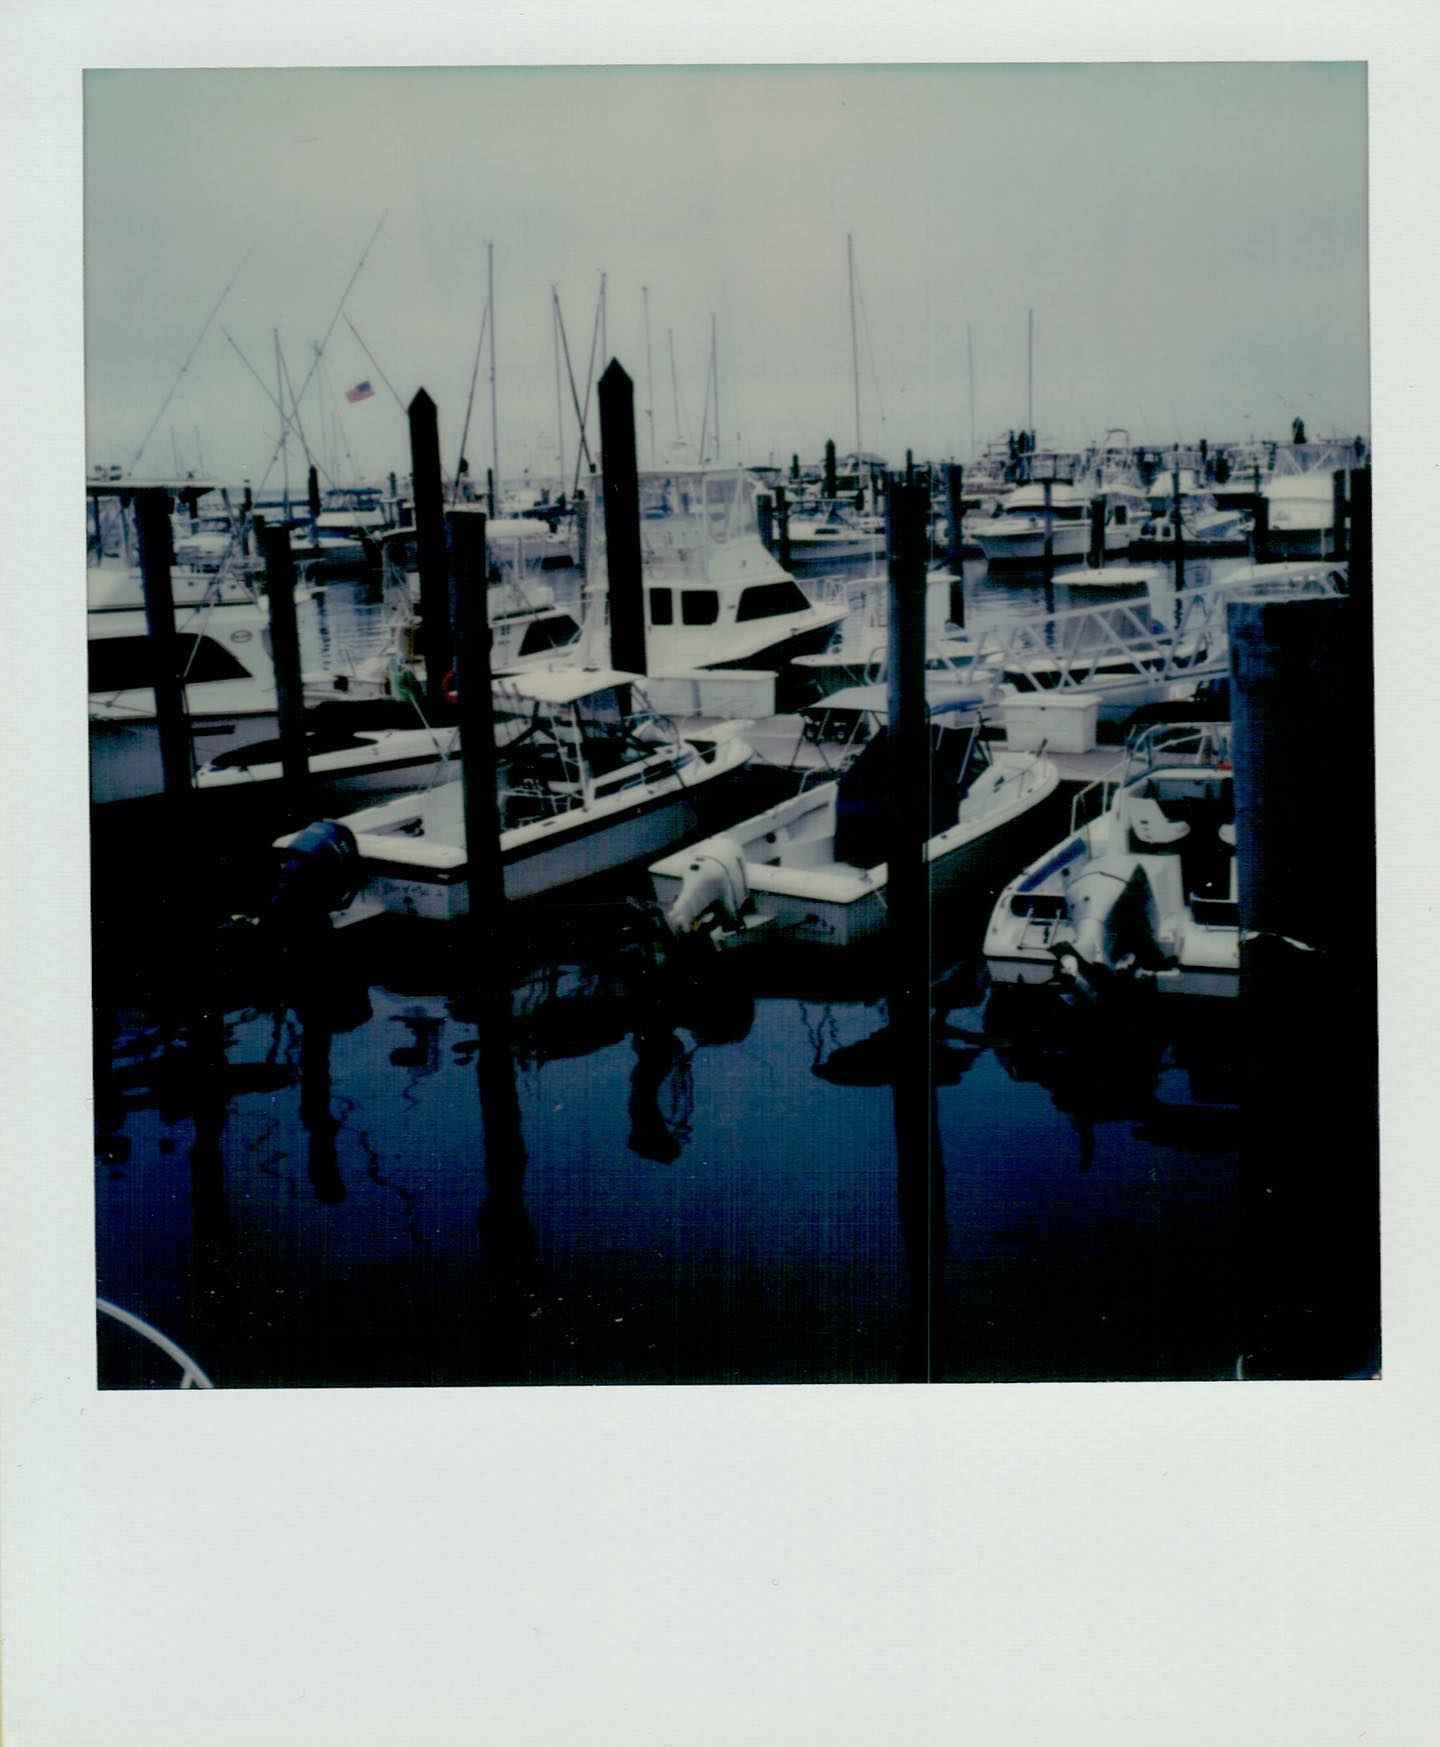 Marina

First shot with my newly-arrived @mintcamera SLR670-S. @polaroidoriginals had a sale last weekend where any purchase over $300 got 30% off. Couldnât resist that. #polaroid #polaroidoriginals #mintcamera #slr670 #slr670s #sx70film #film #filmphotography